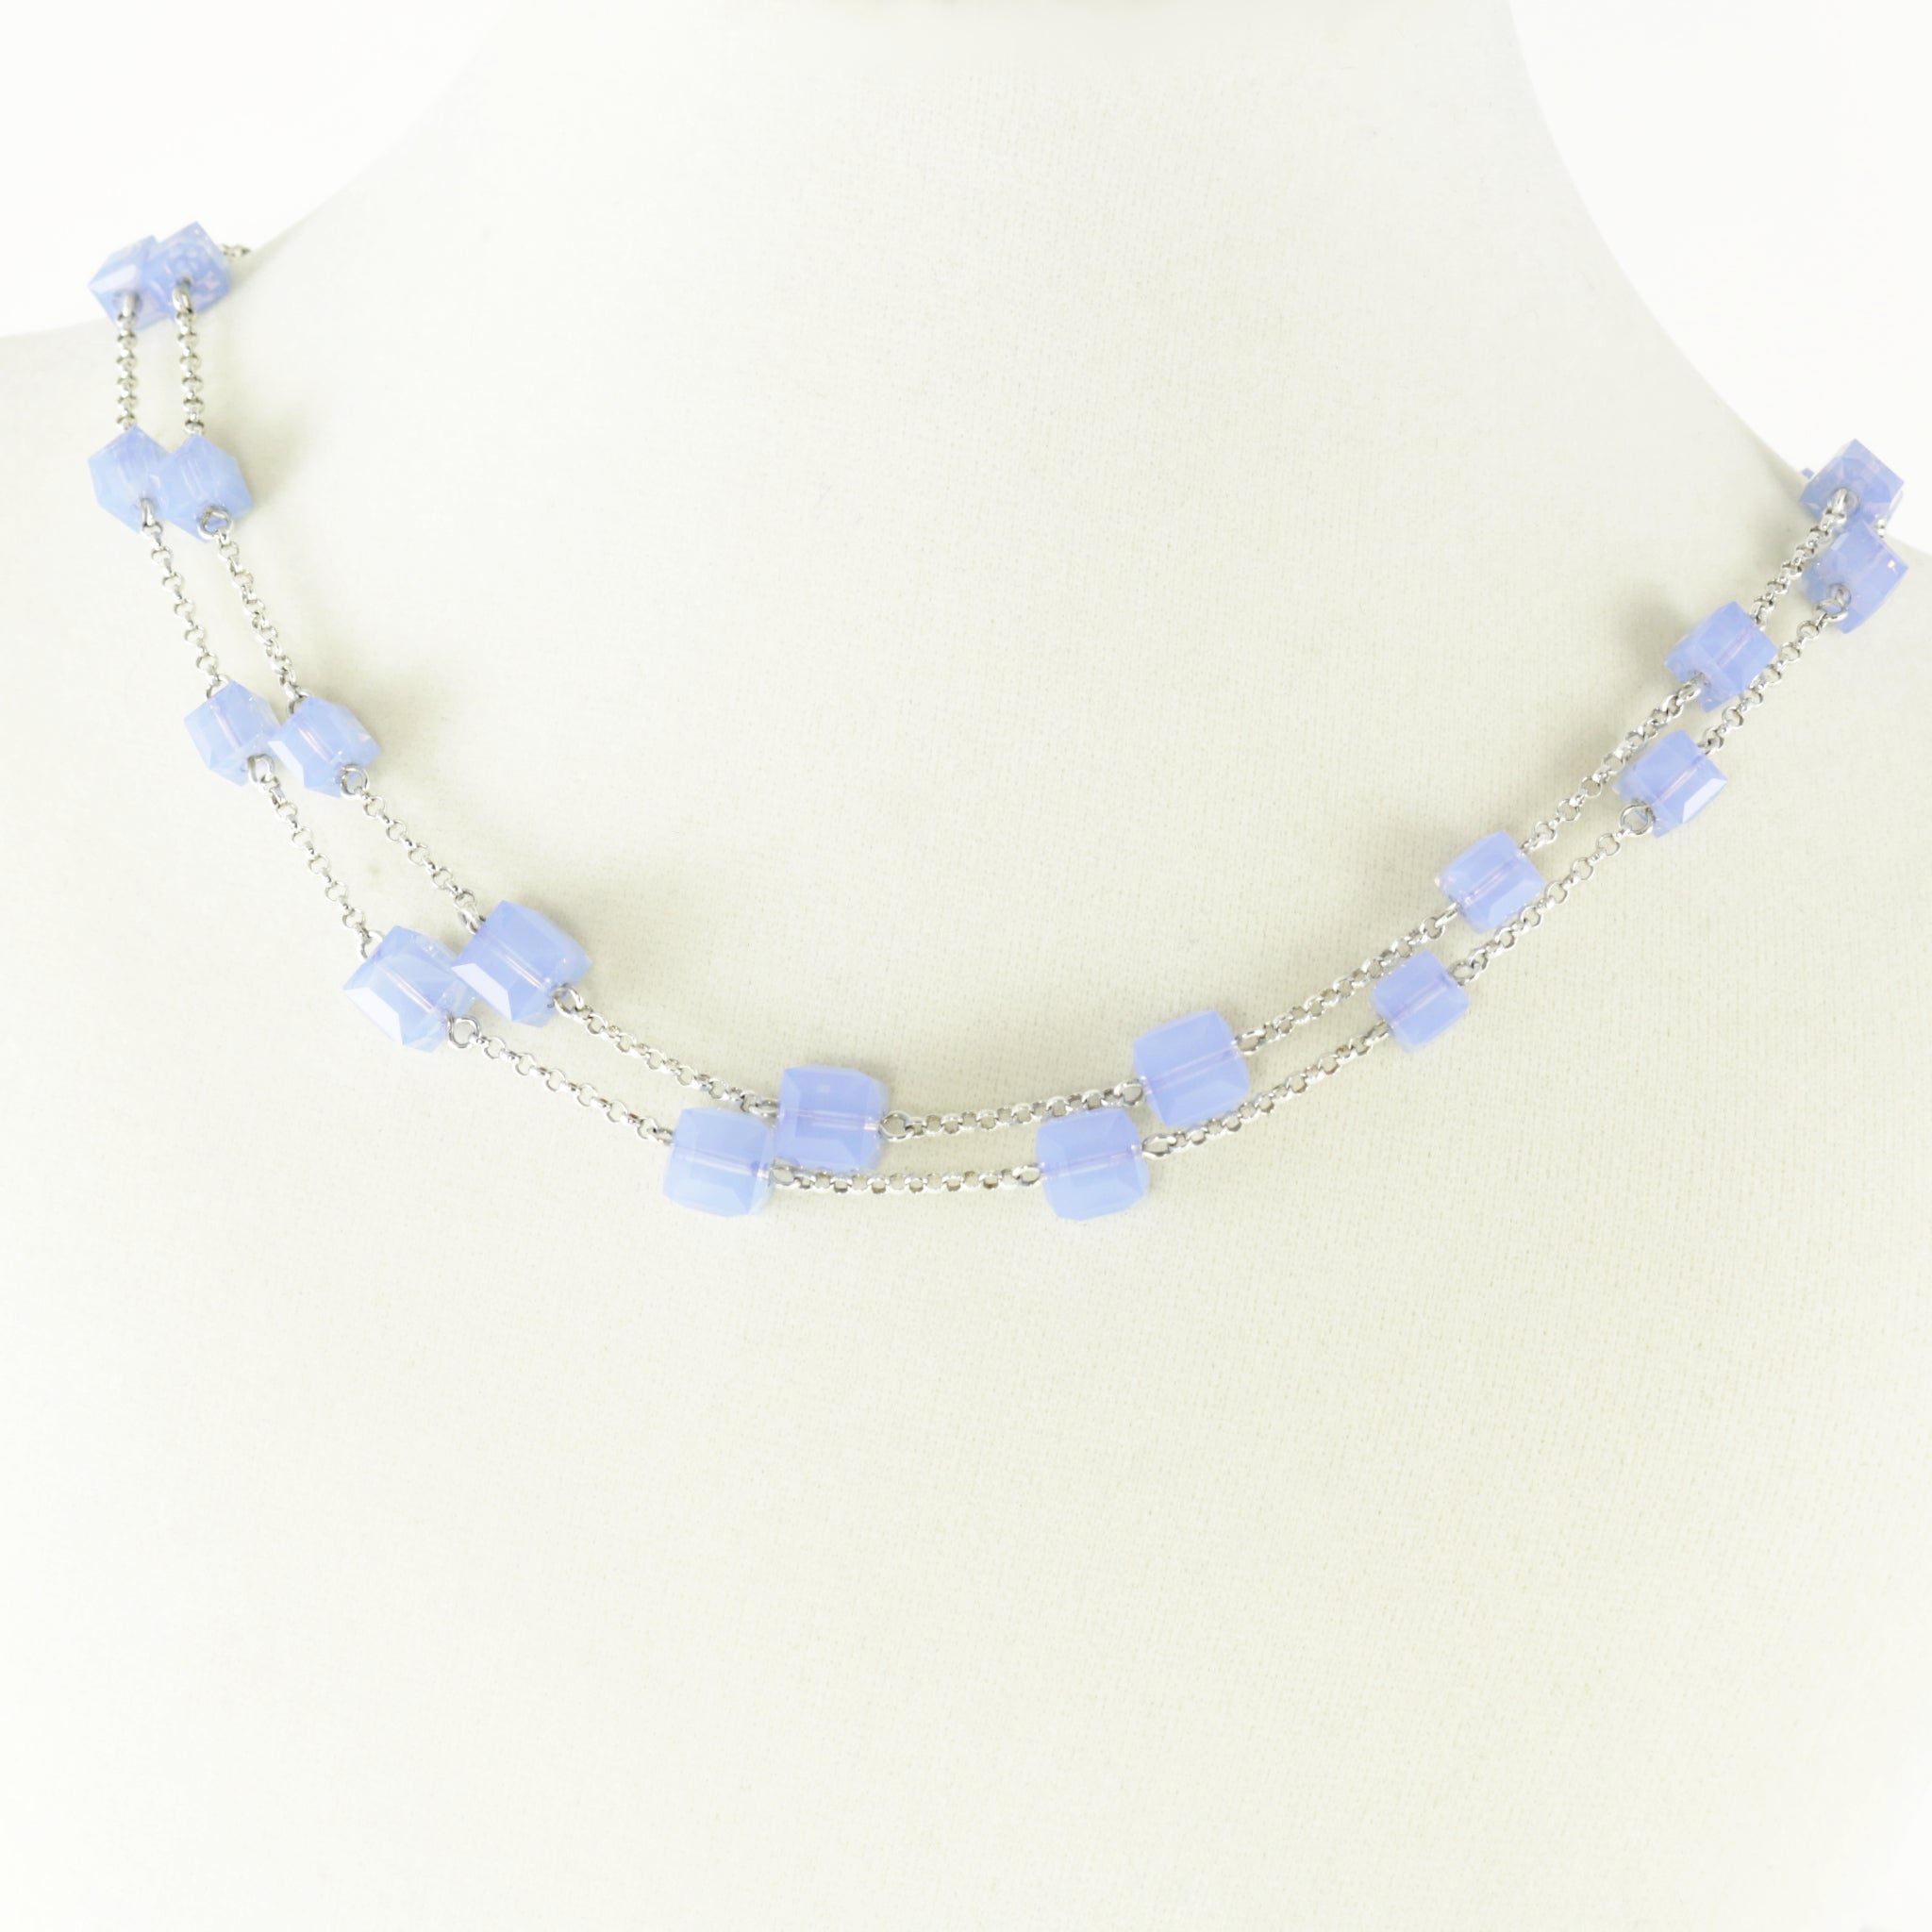 Windows Change-ABLE Necklace in Light Blue